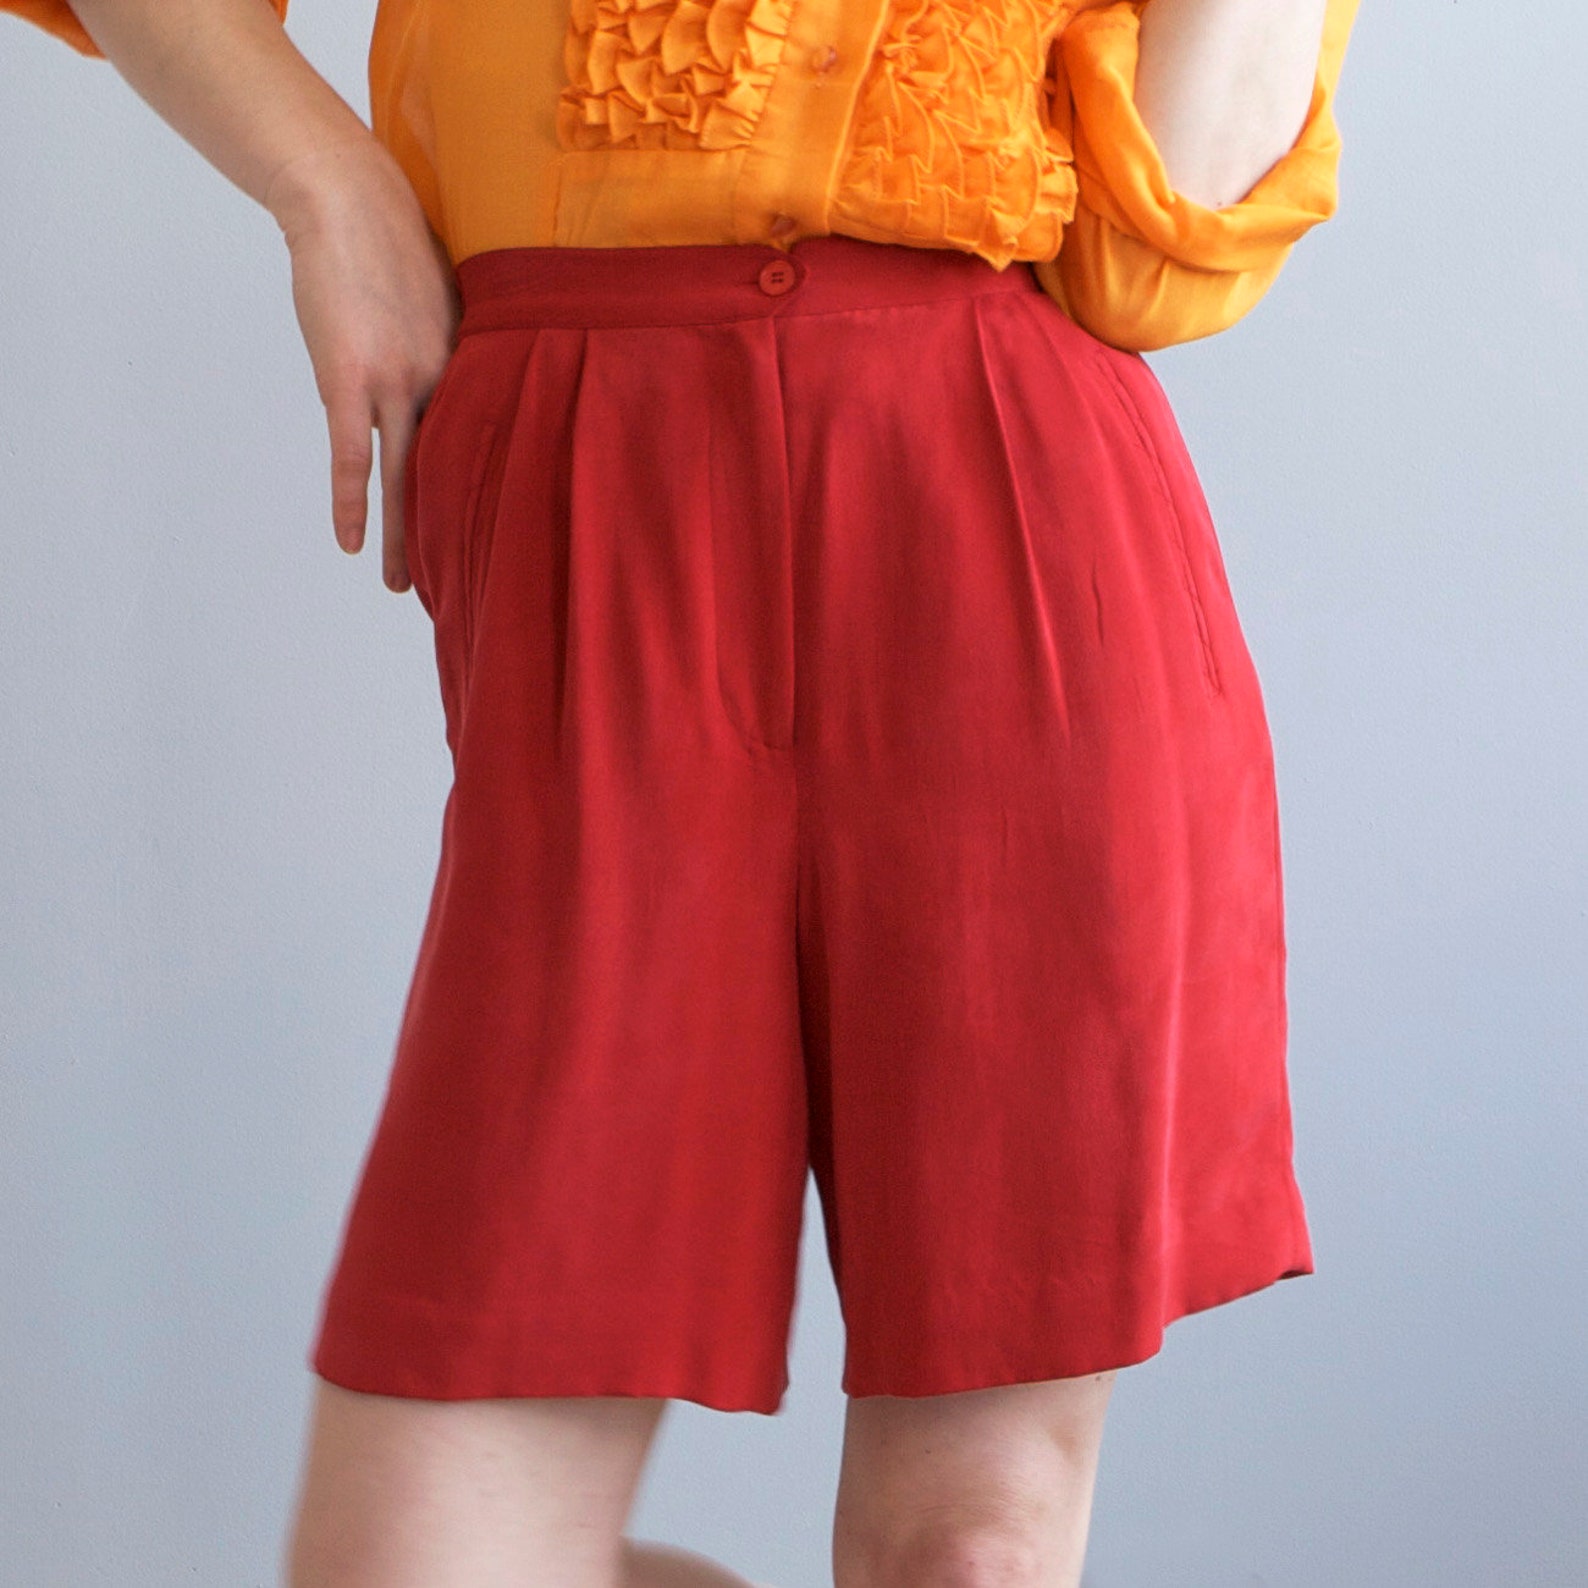 High waist red silk pleated shorts XS | Etsy